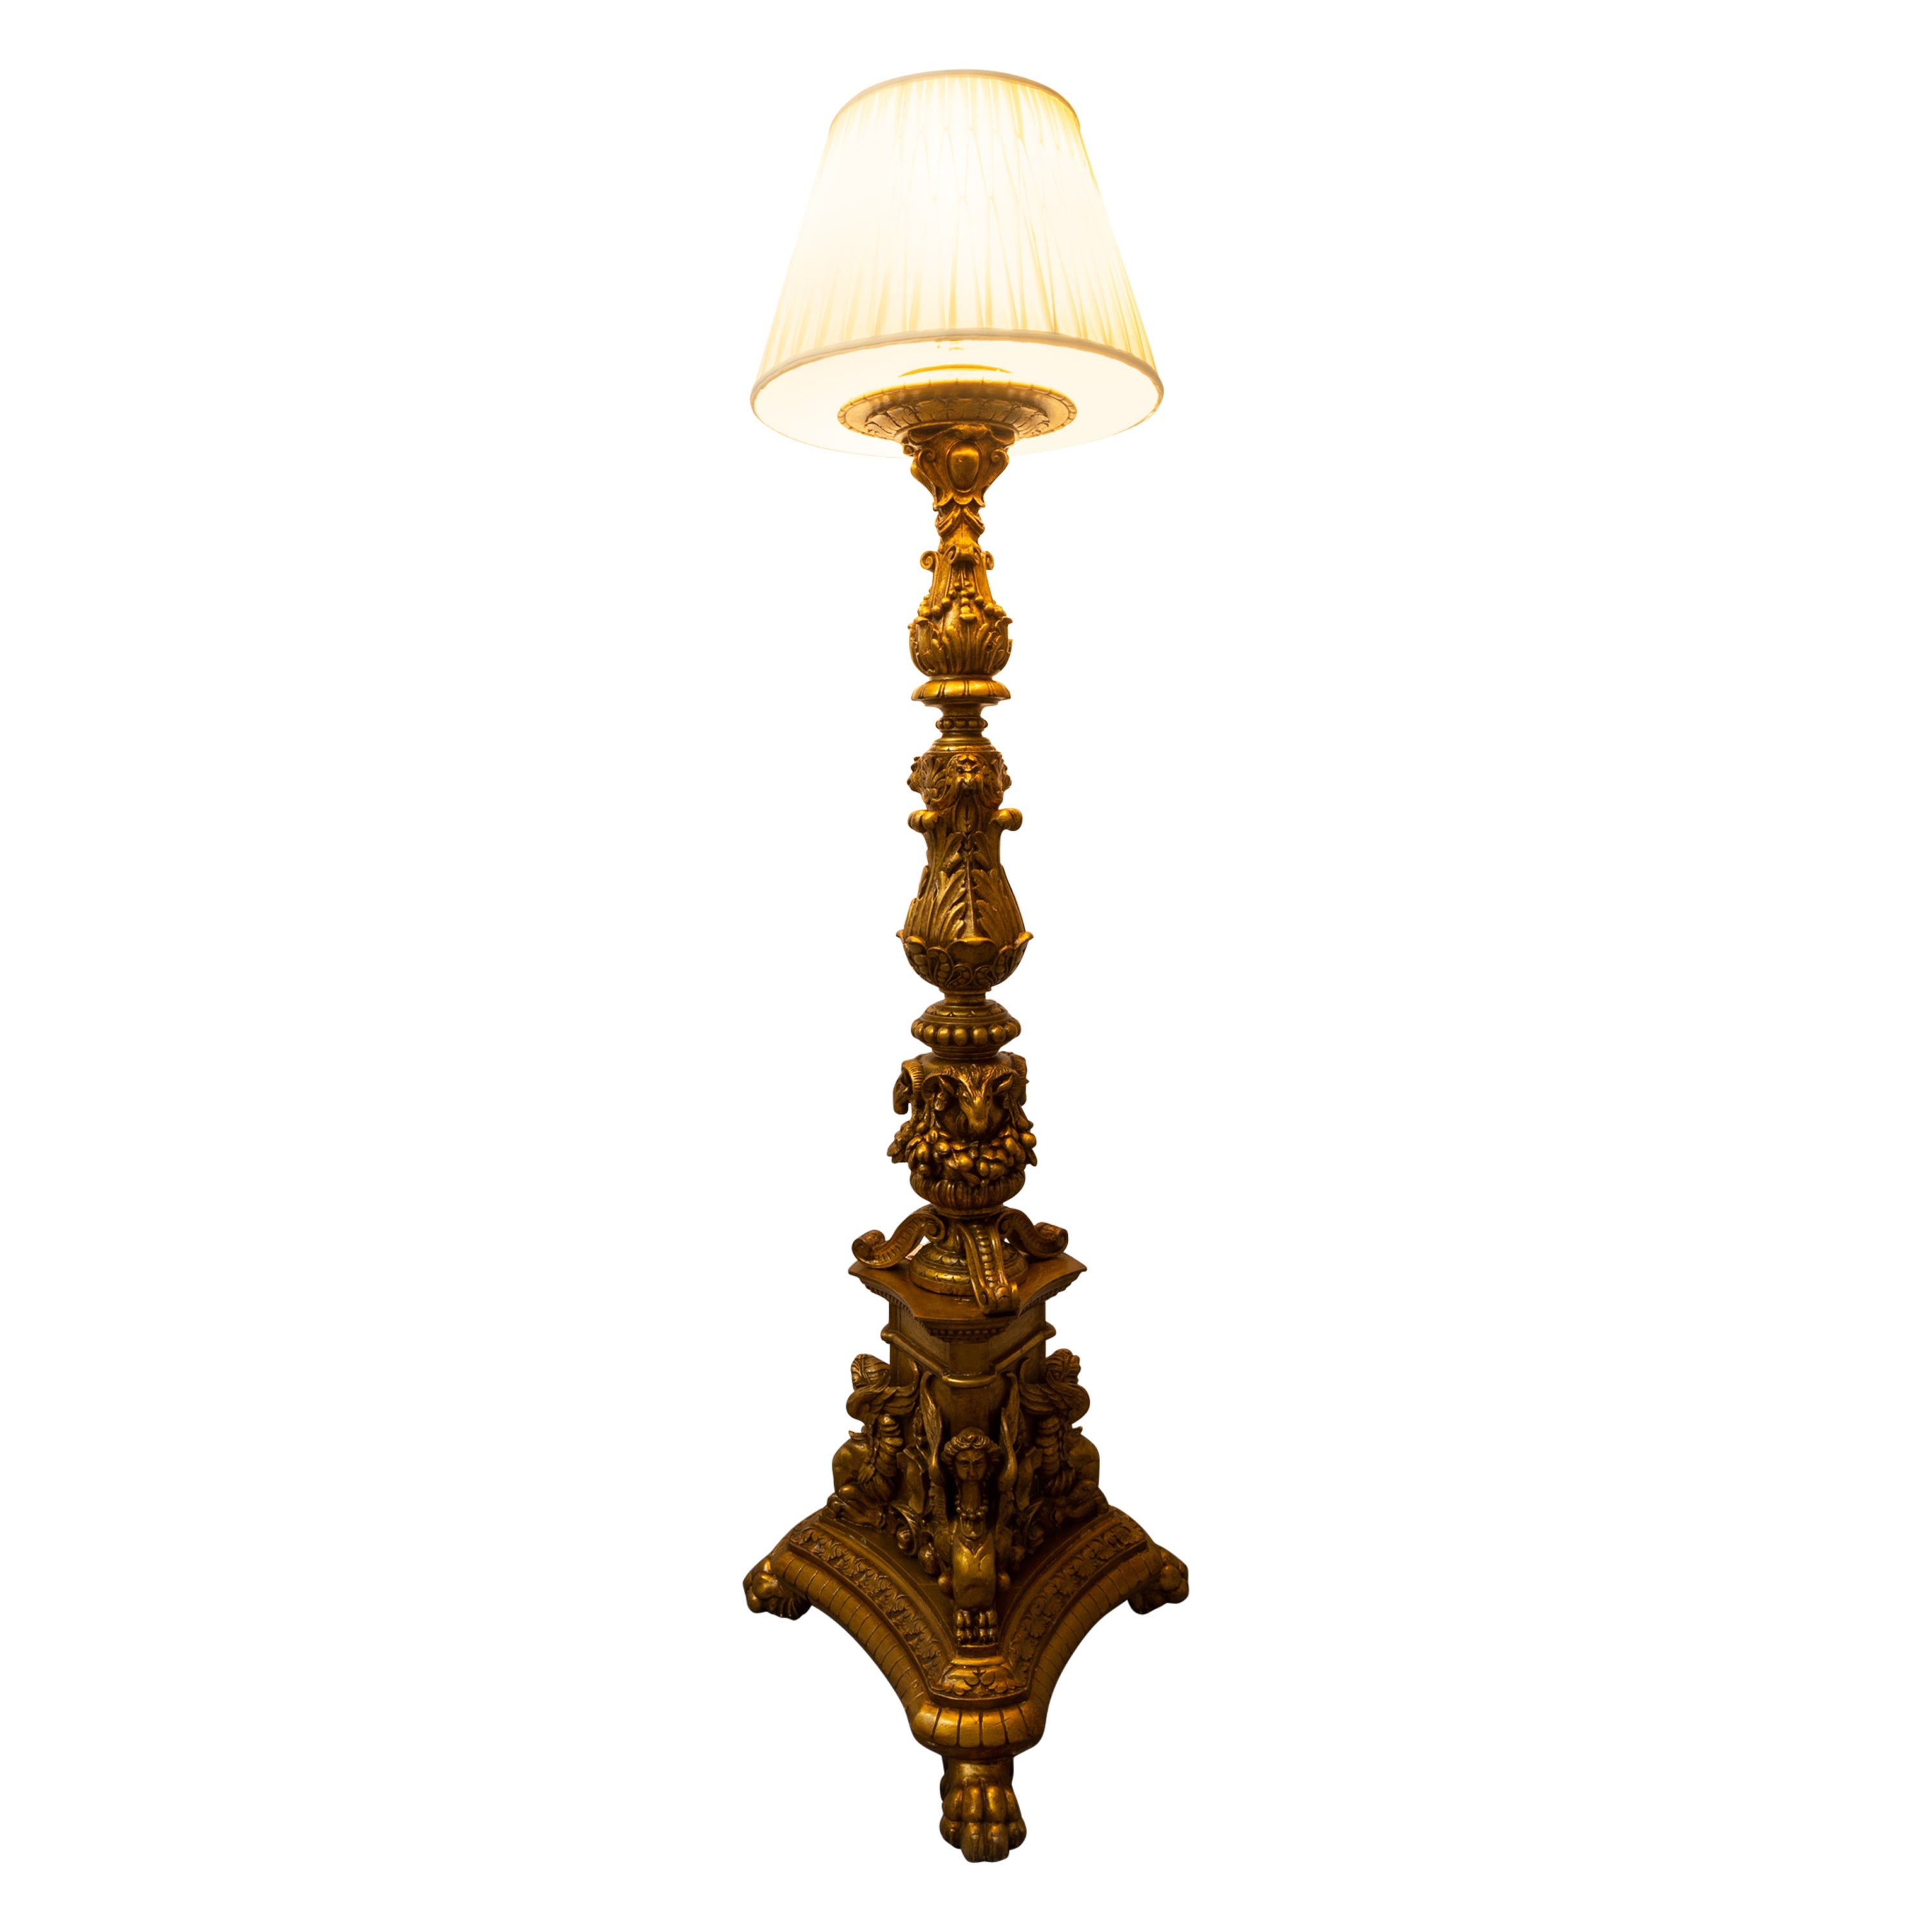 Fine and Well Carved Monumental 19th Century French Gilt Floor Lamp